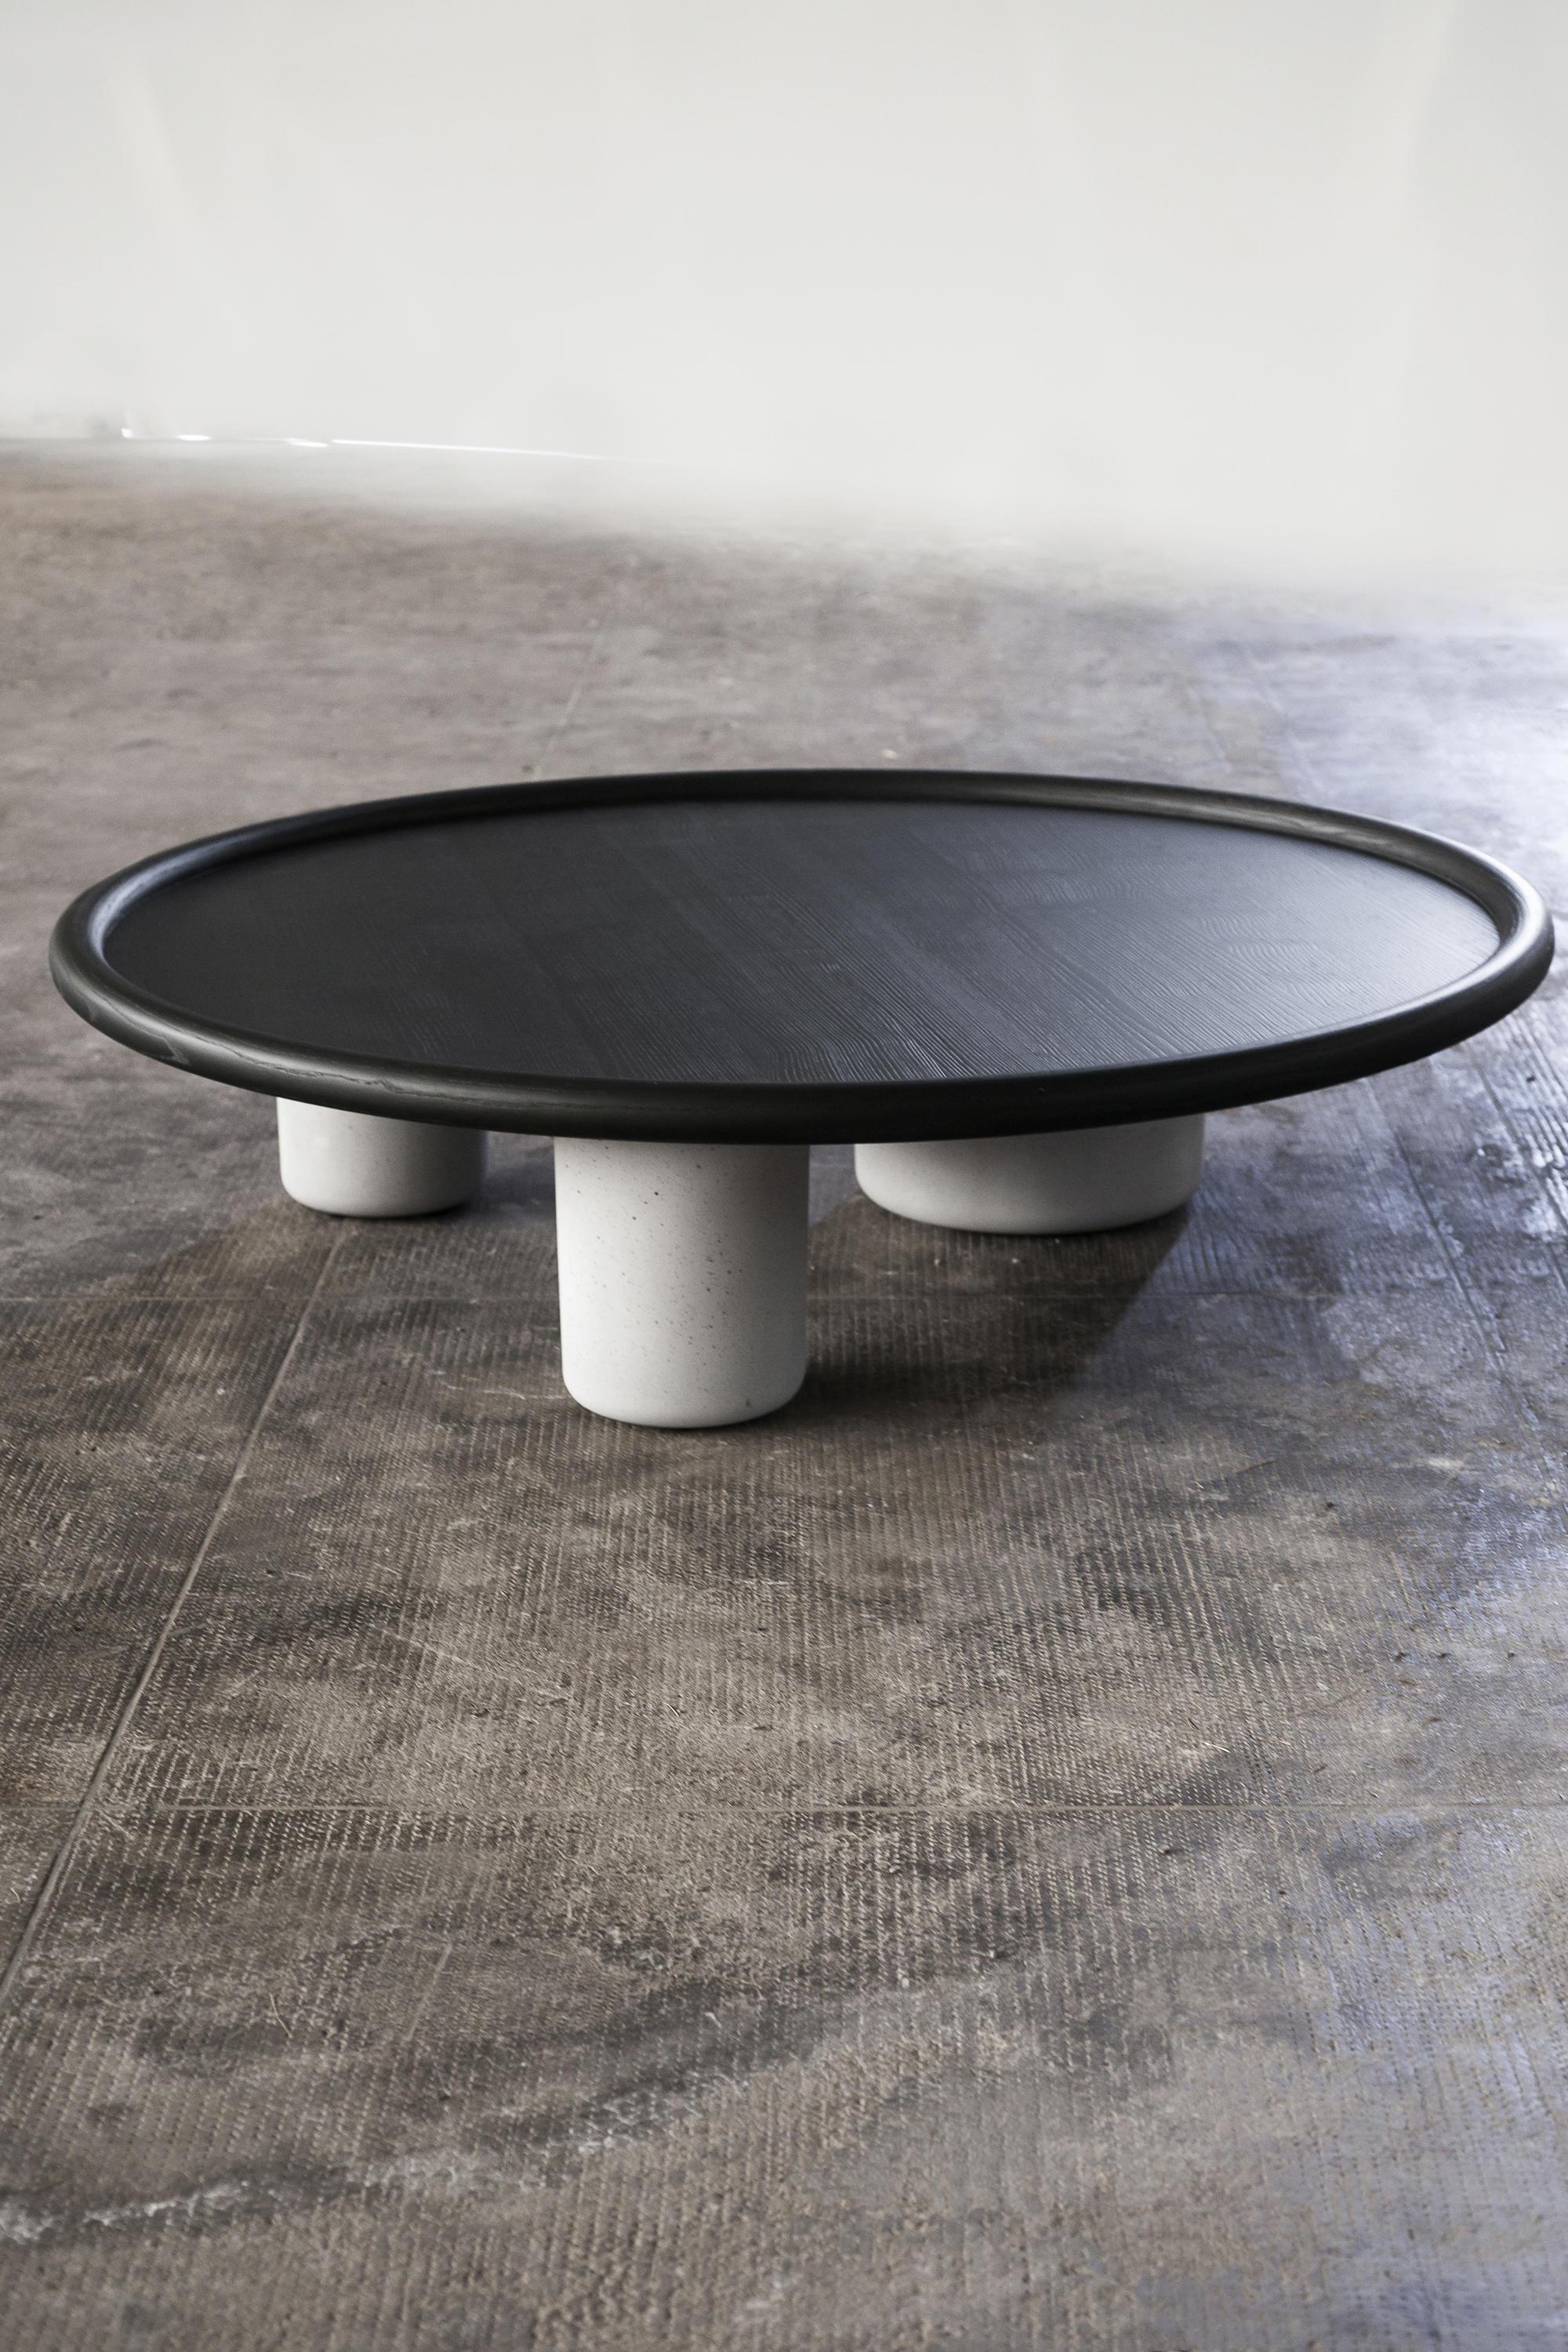 Tacchini Pluto Wood Table Designed by Studiopepe in STOCK 1